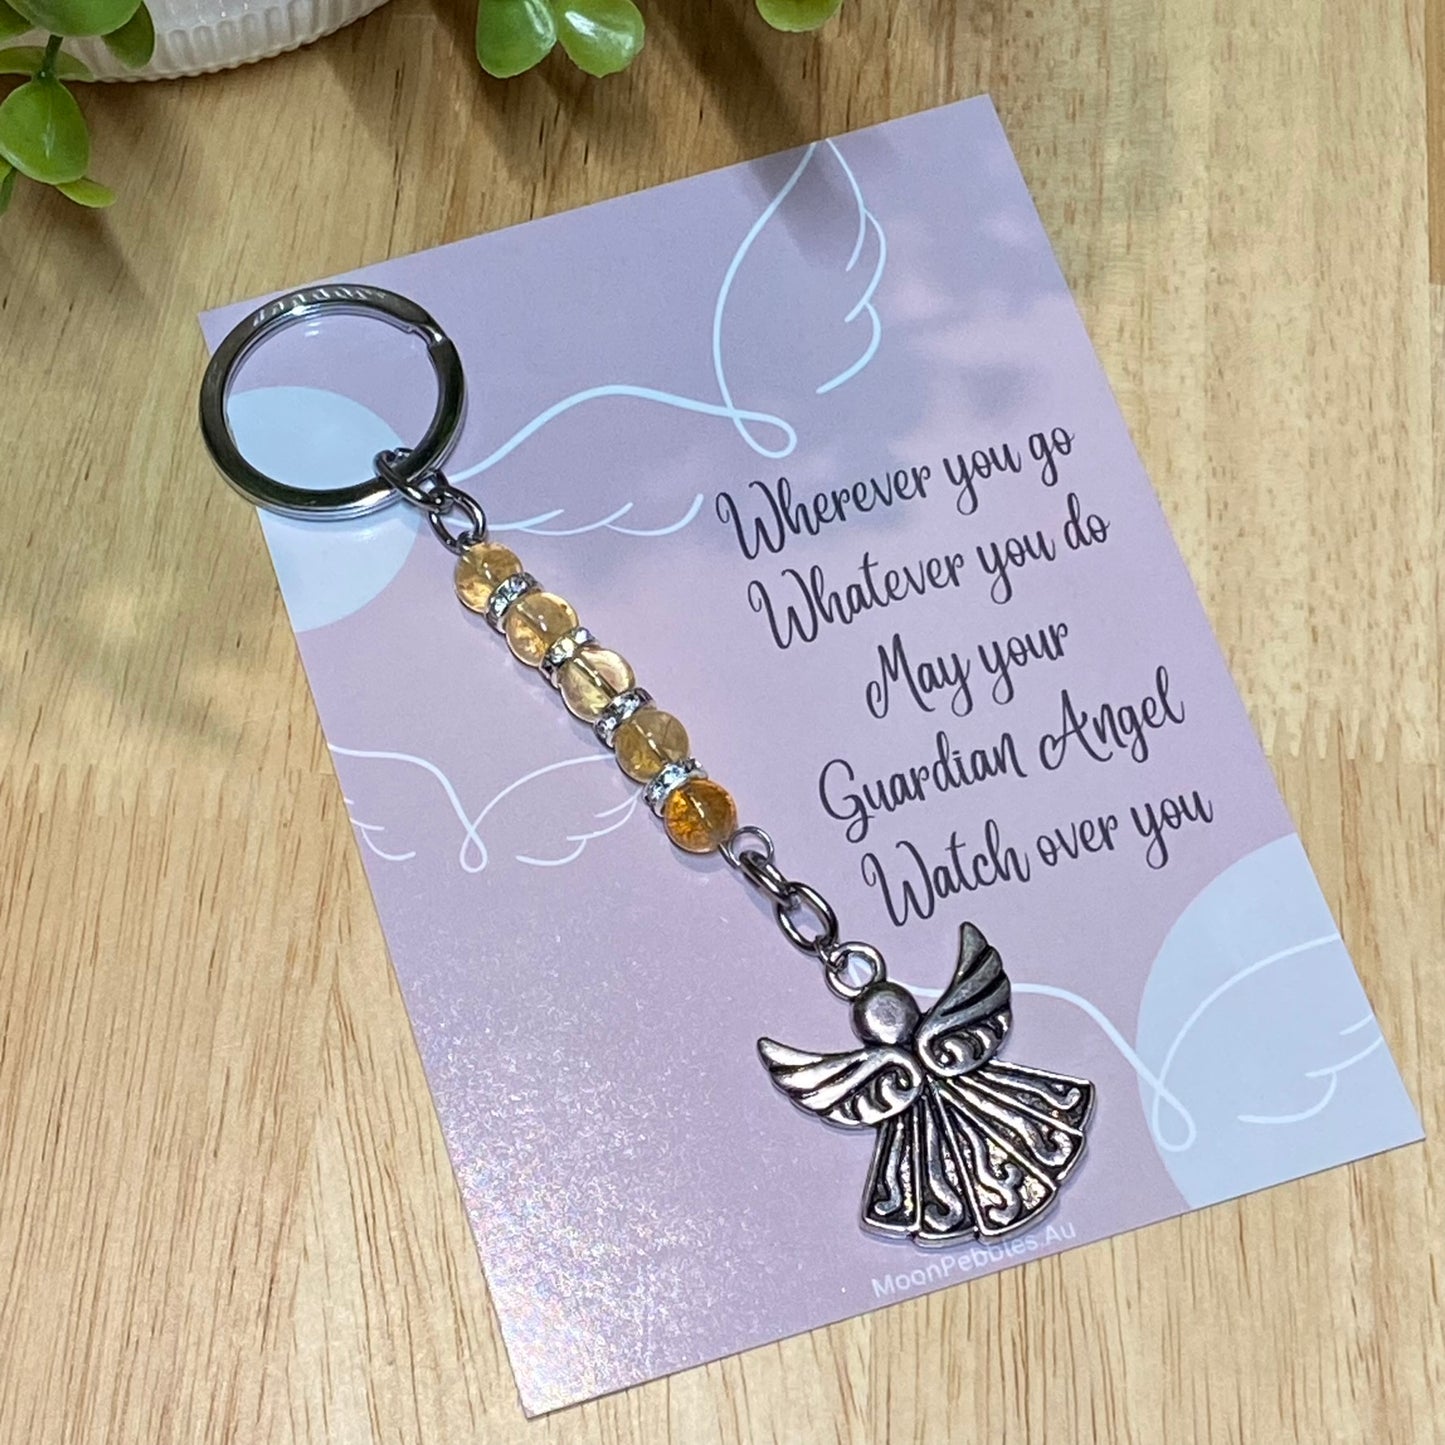 Citrine Guardian Angel Keyring - Prosperity, Confidence and Happiness